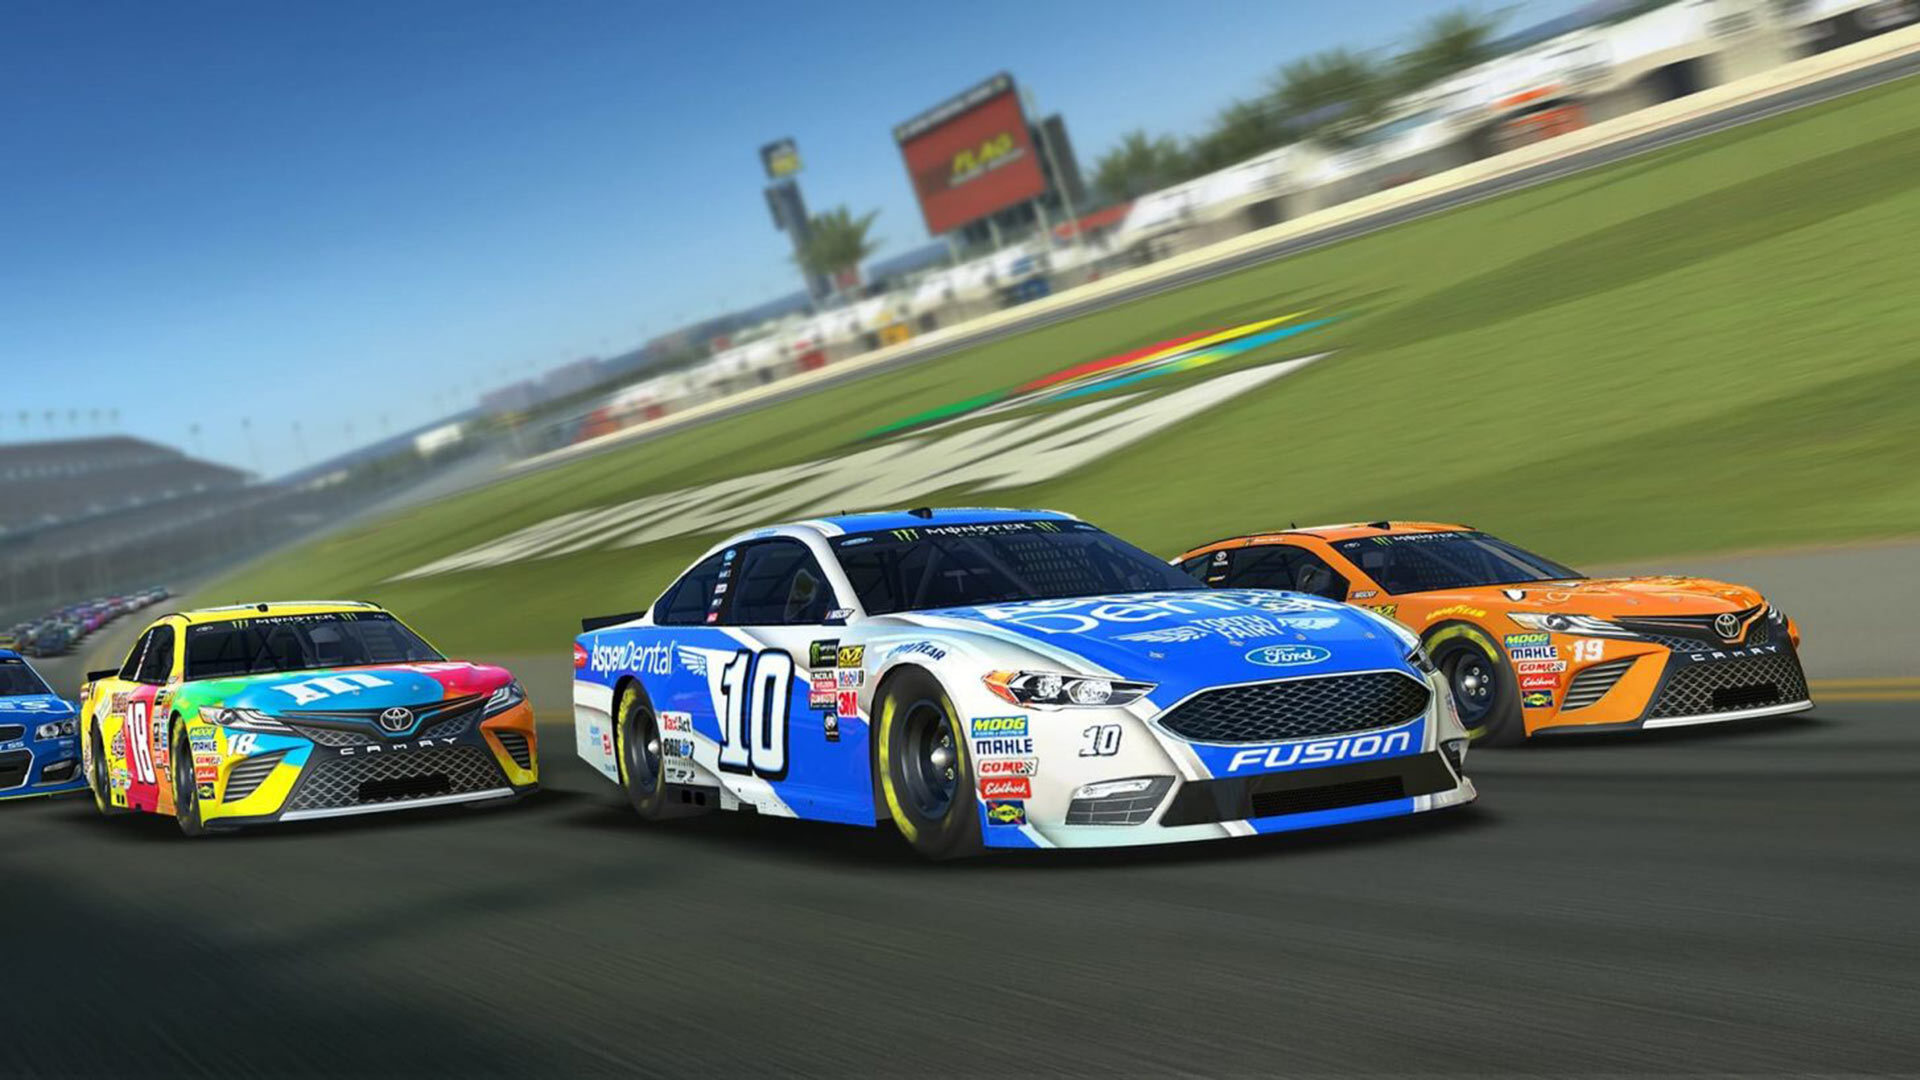 2019 Best iOS Android Mobile Racing Games